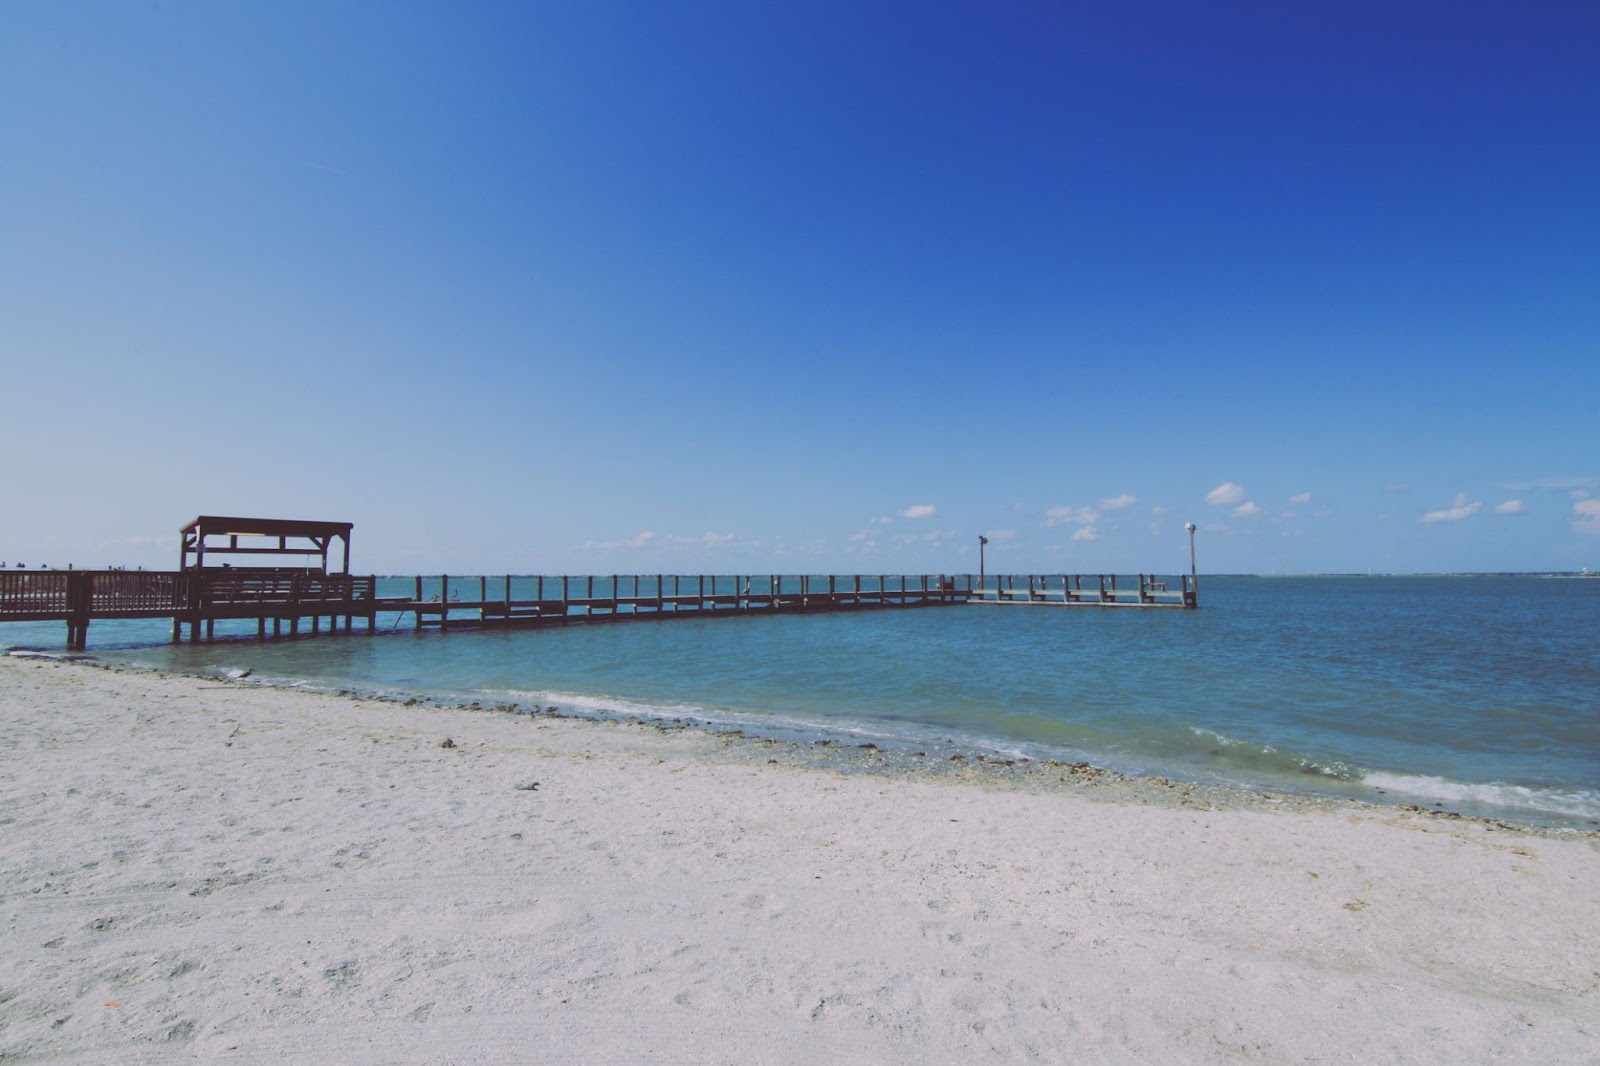 Aside from relaxing and swimming, you can spend the day surfing, camping, fishing, and birdwatching. The Mustang Island State Park Kayaking Route, which encompasses 3 passages along the area's coastline, is also popular among tourists.